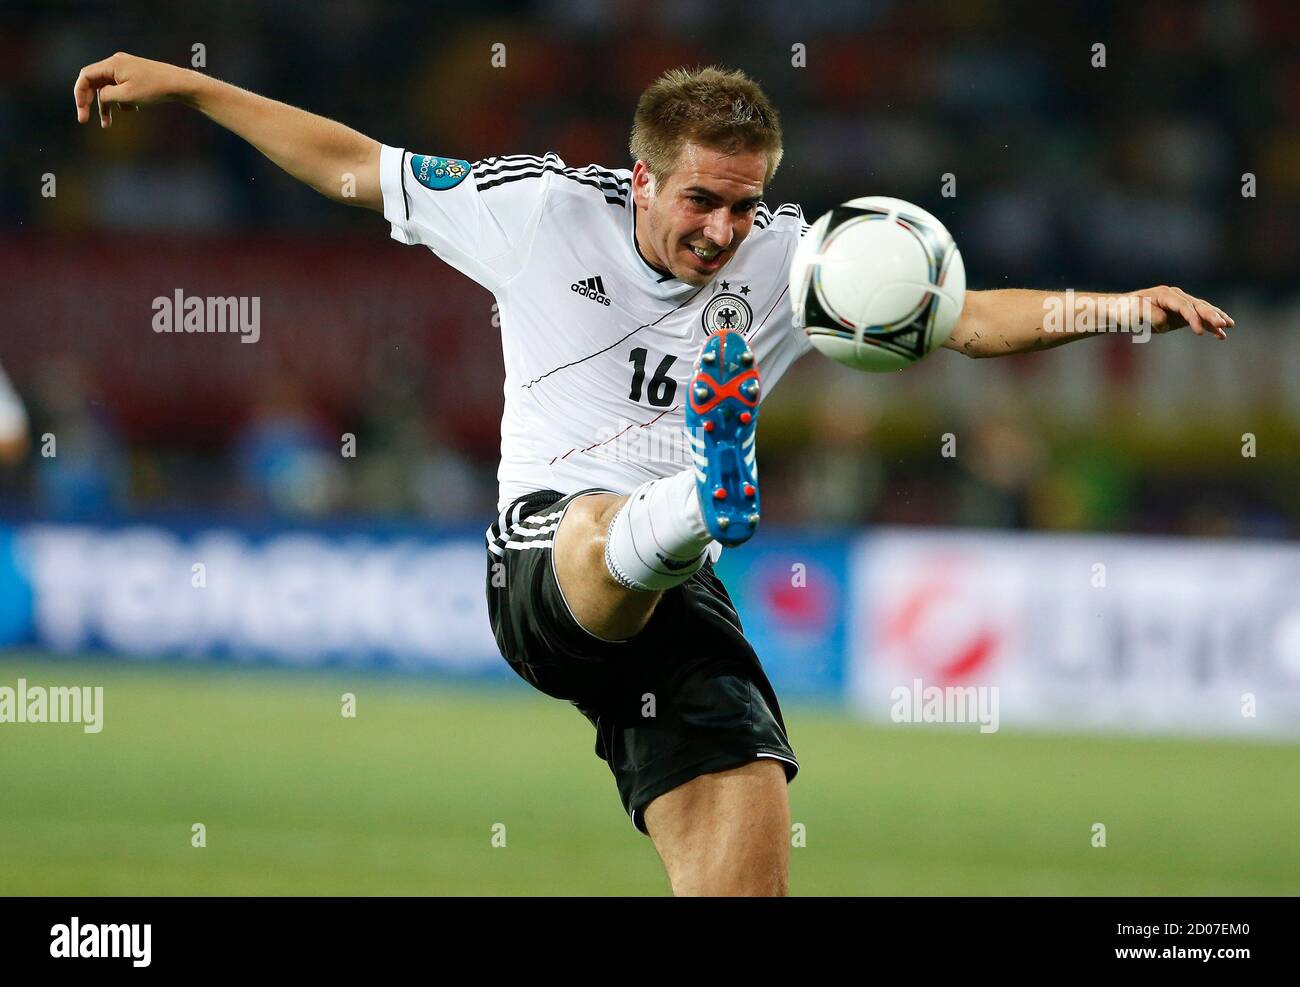 Germany's Philipp Lahm controls the ball during their Group B Euro 2012 soccer match against Netherlands at the Metalist stadium in Kharkiv June 13, 2012.                  REUTERS/Alessandro Bianchi (UKRAINE  - Tags: SPORT SOCCER) Stock Photo